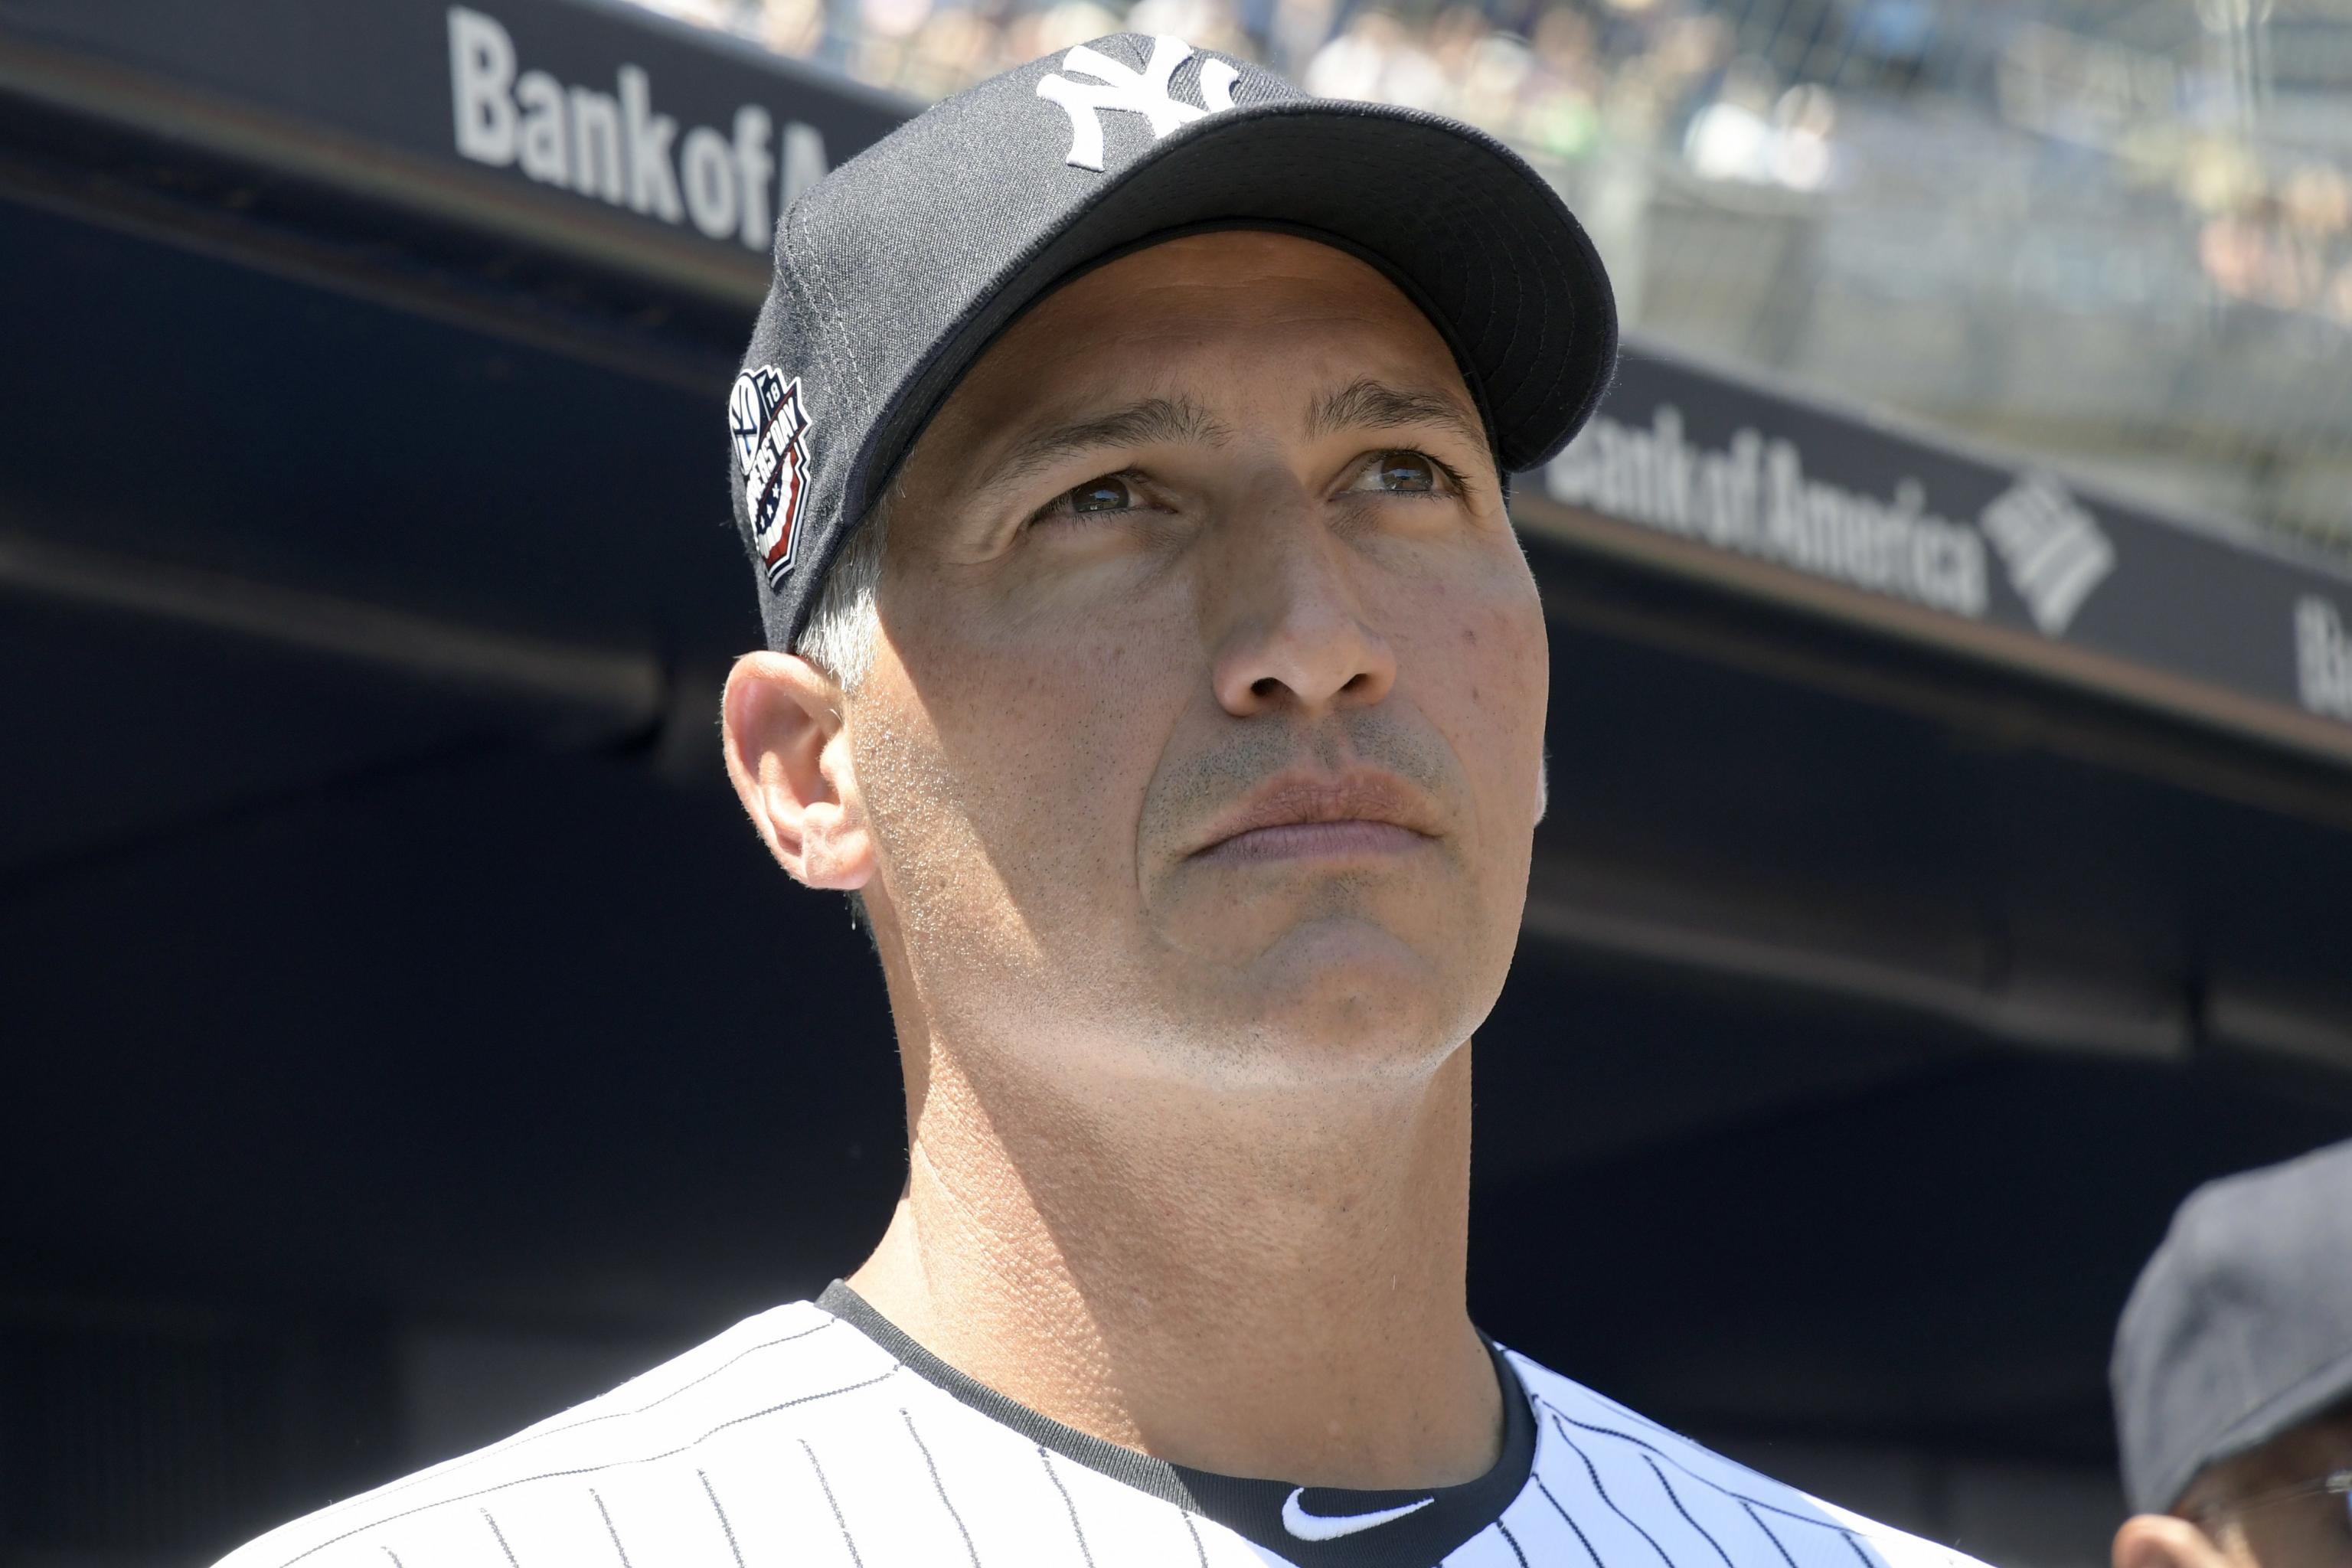 Will Andy Pettitte make the Hall of Fame at some point? - Newsday